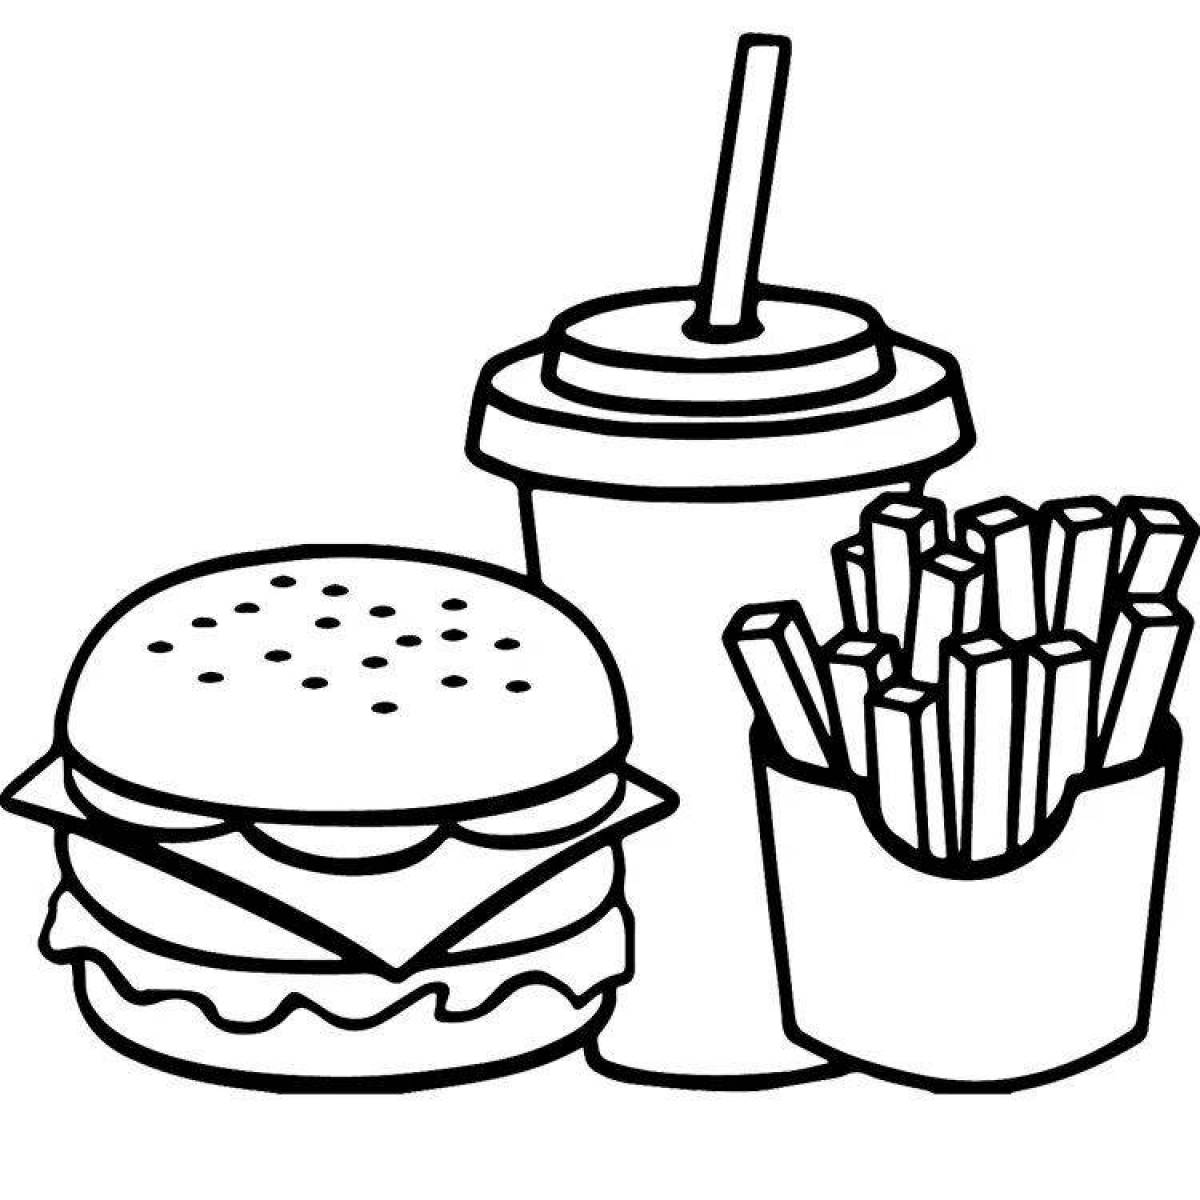 Coloring page juicy burger and french fries